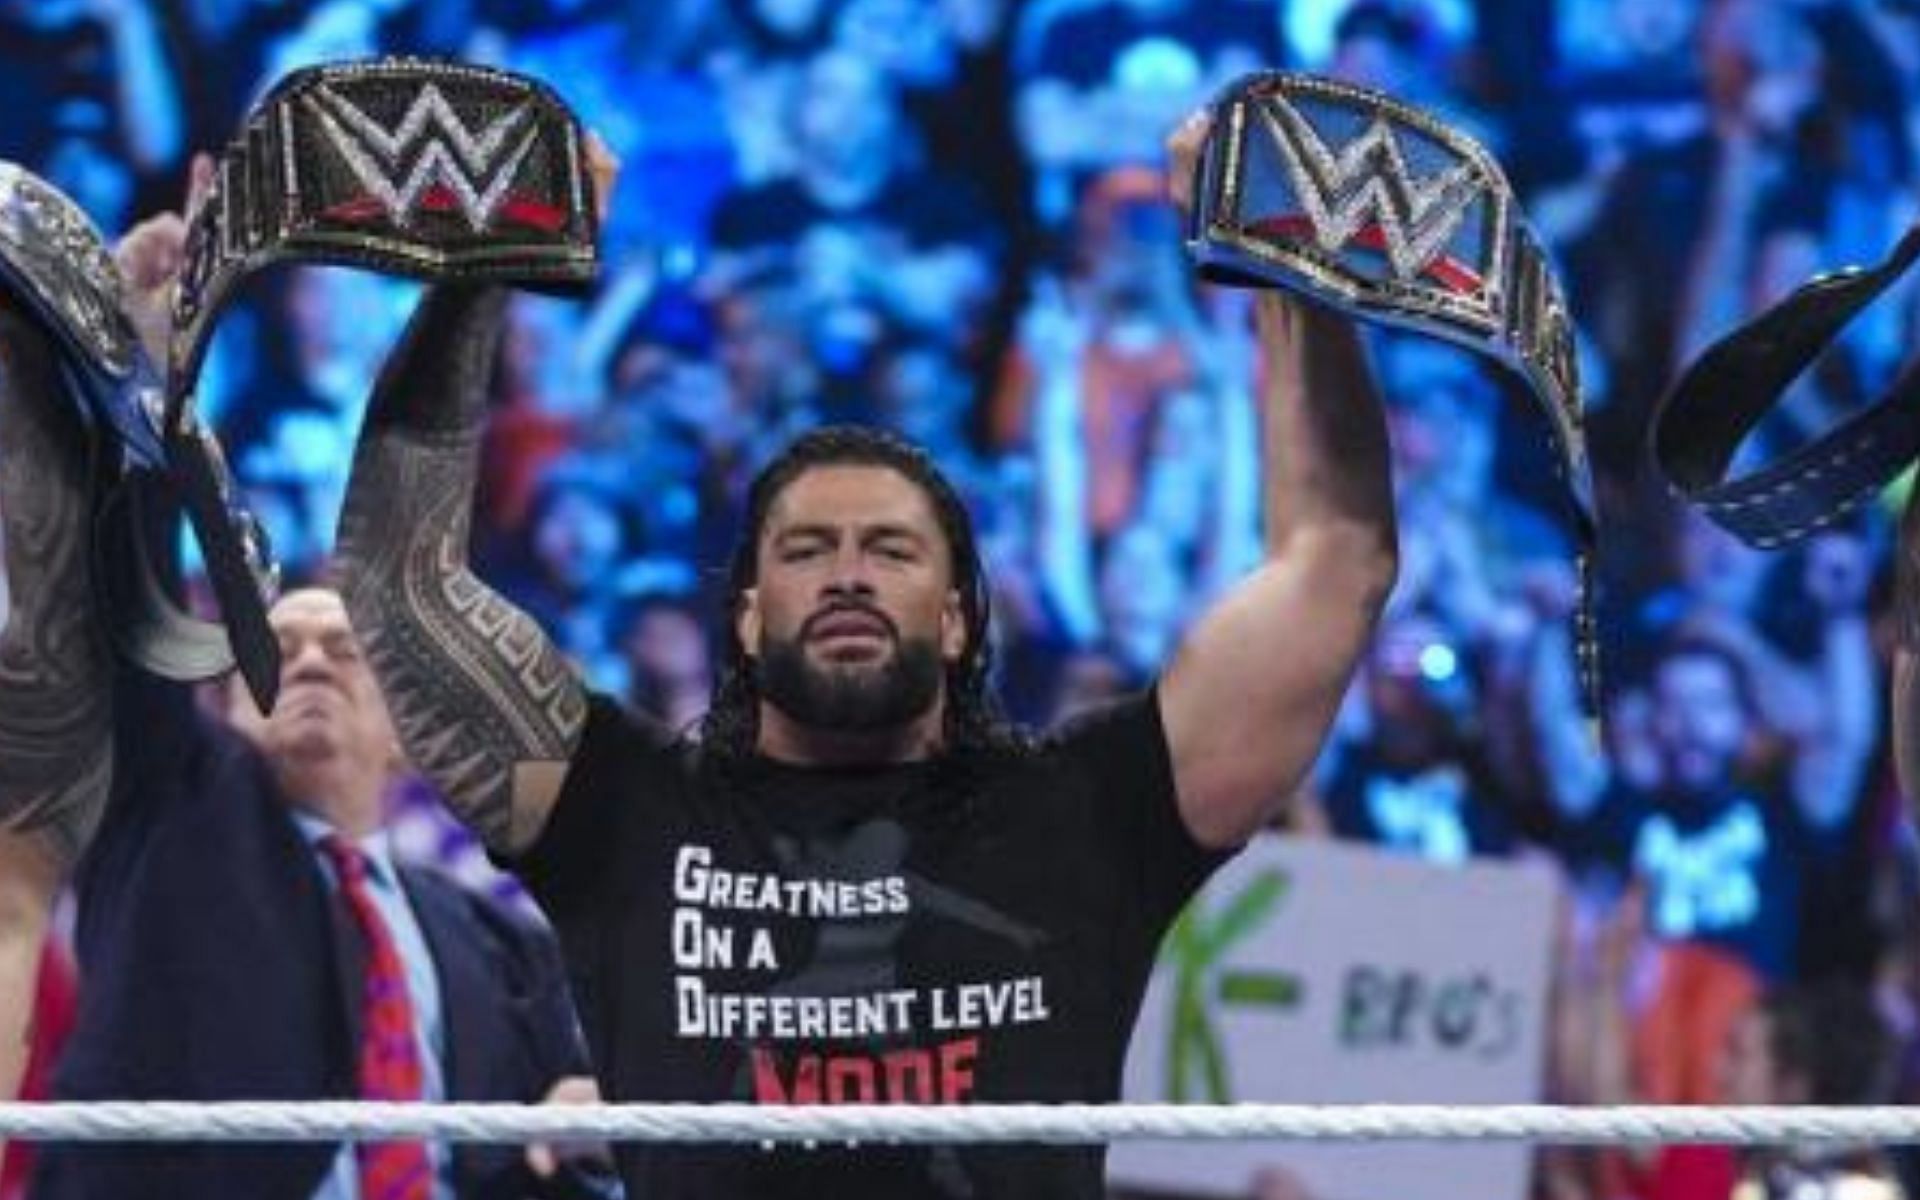 Roman Reigns has been Universal Champion for over 650 days